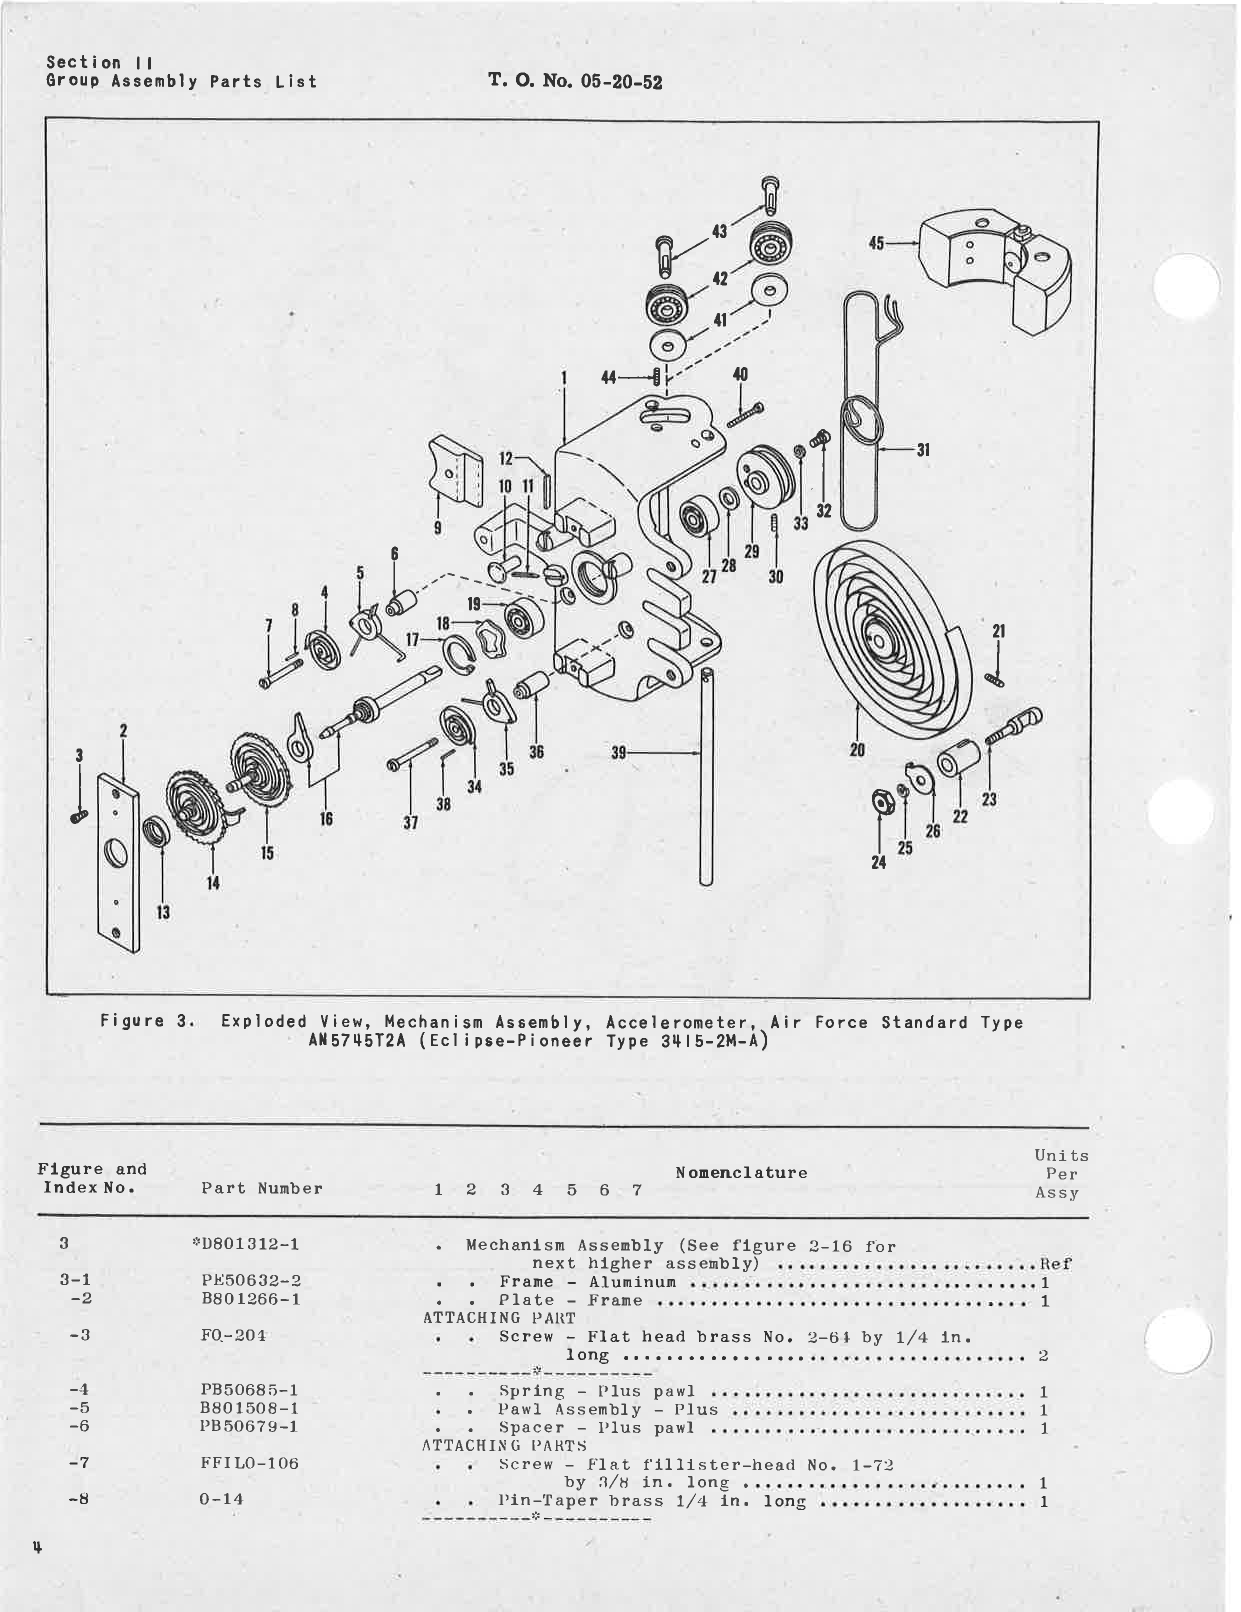 Sample page 8 from AirCorps Library document: Parts Catalog for Type AN5745T2A Accelerometer